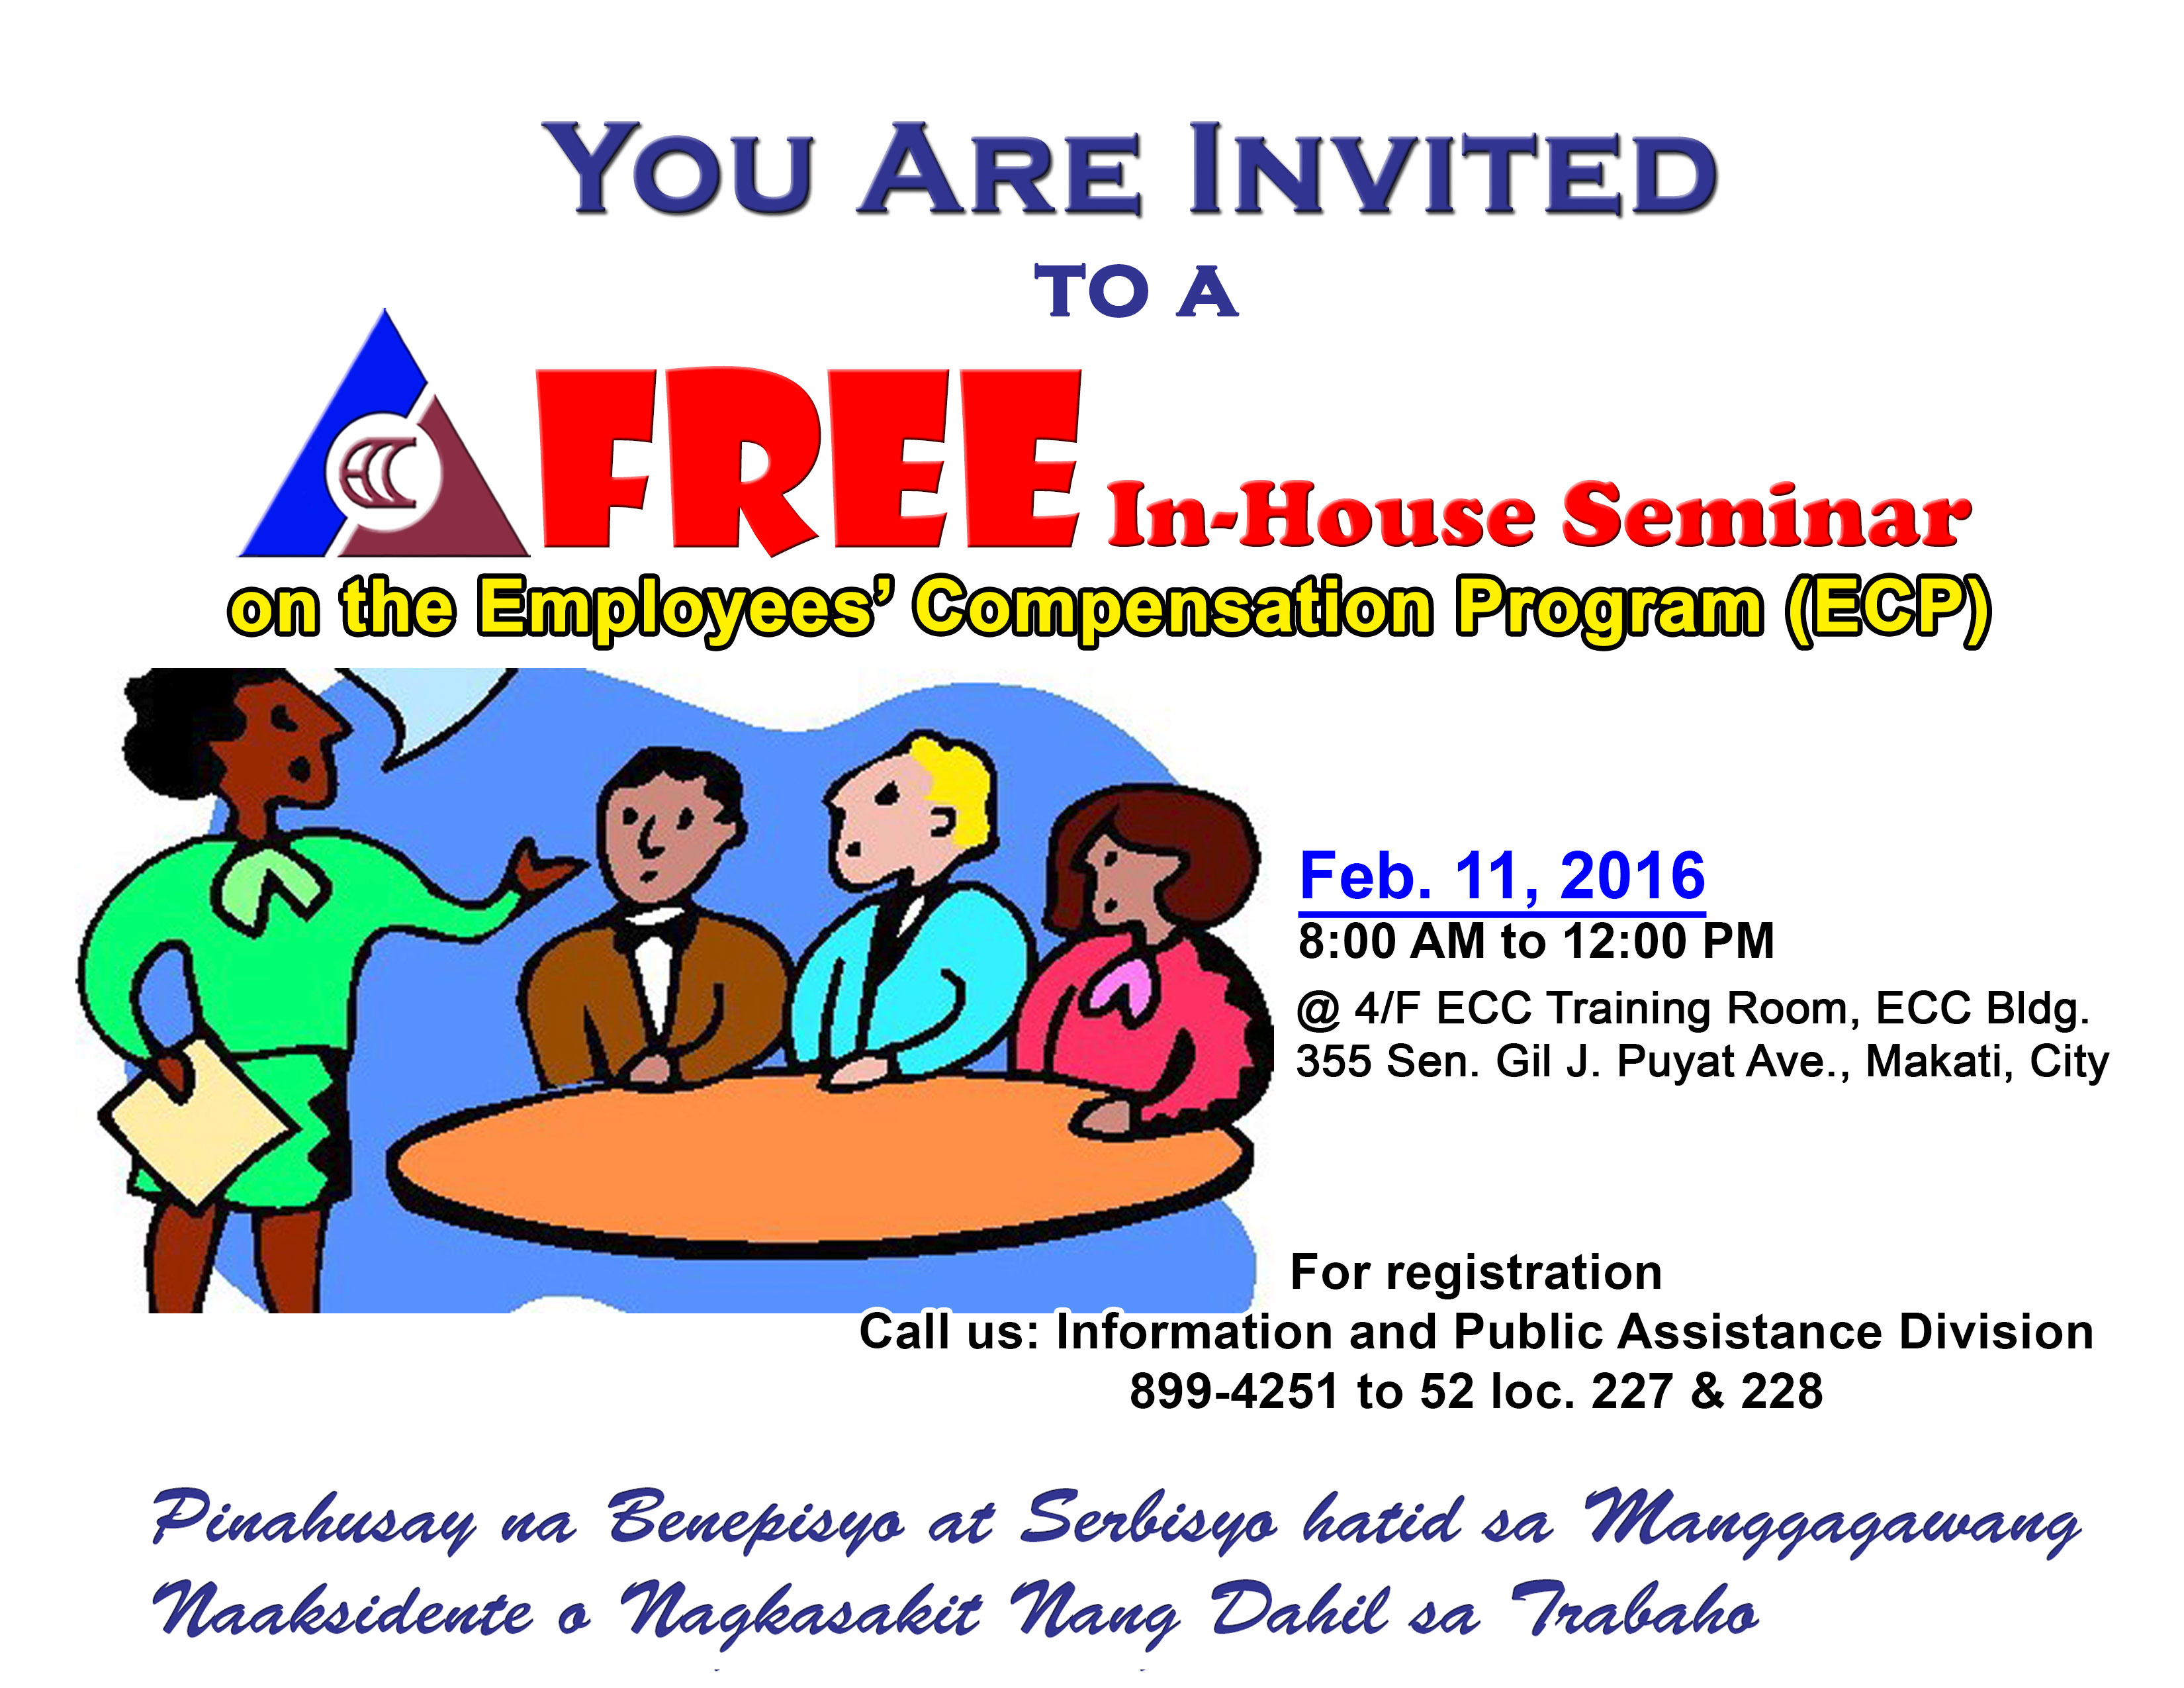 Invitation for In-House Seminar on February 11, 2016 8:00 am to 12:nn at ECC Training Room